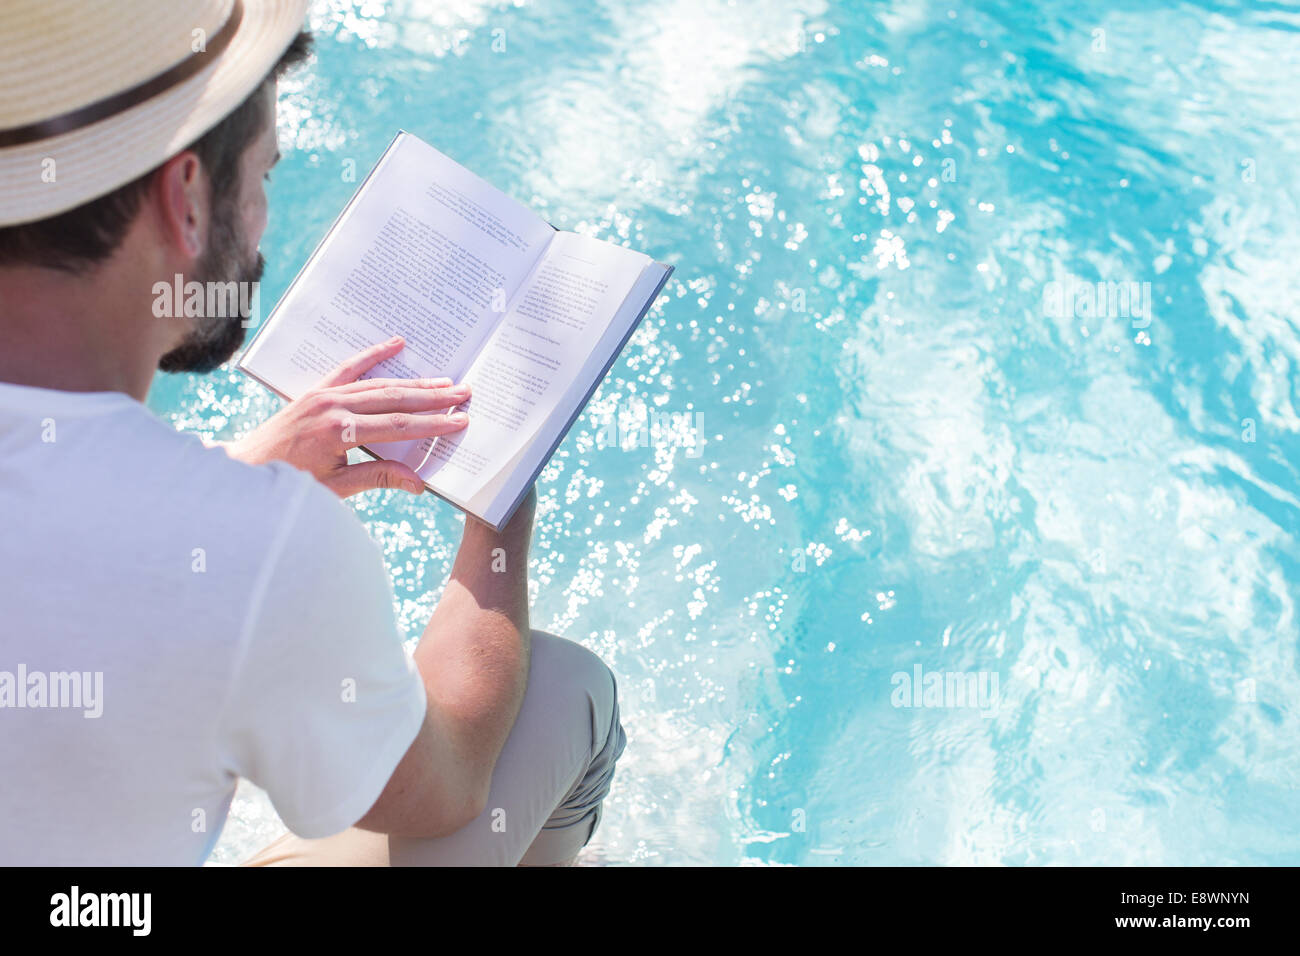 Man reading book over swimming pool Stock Photo